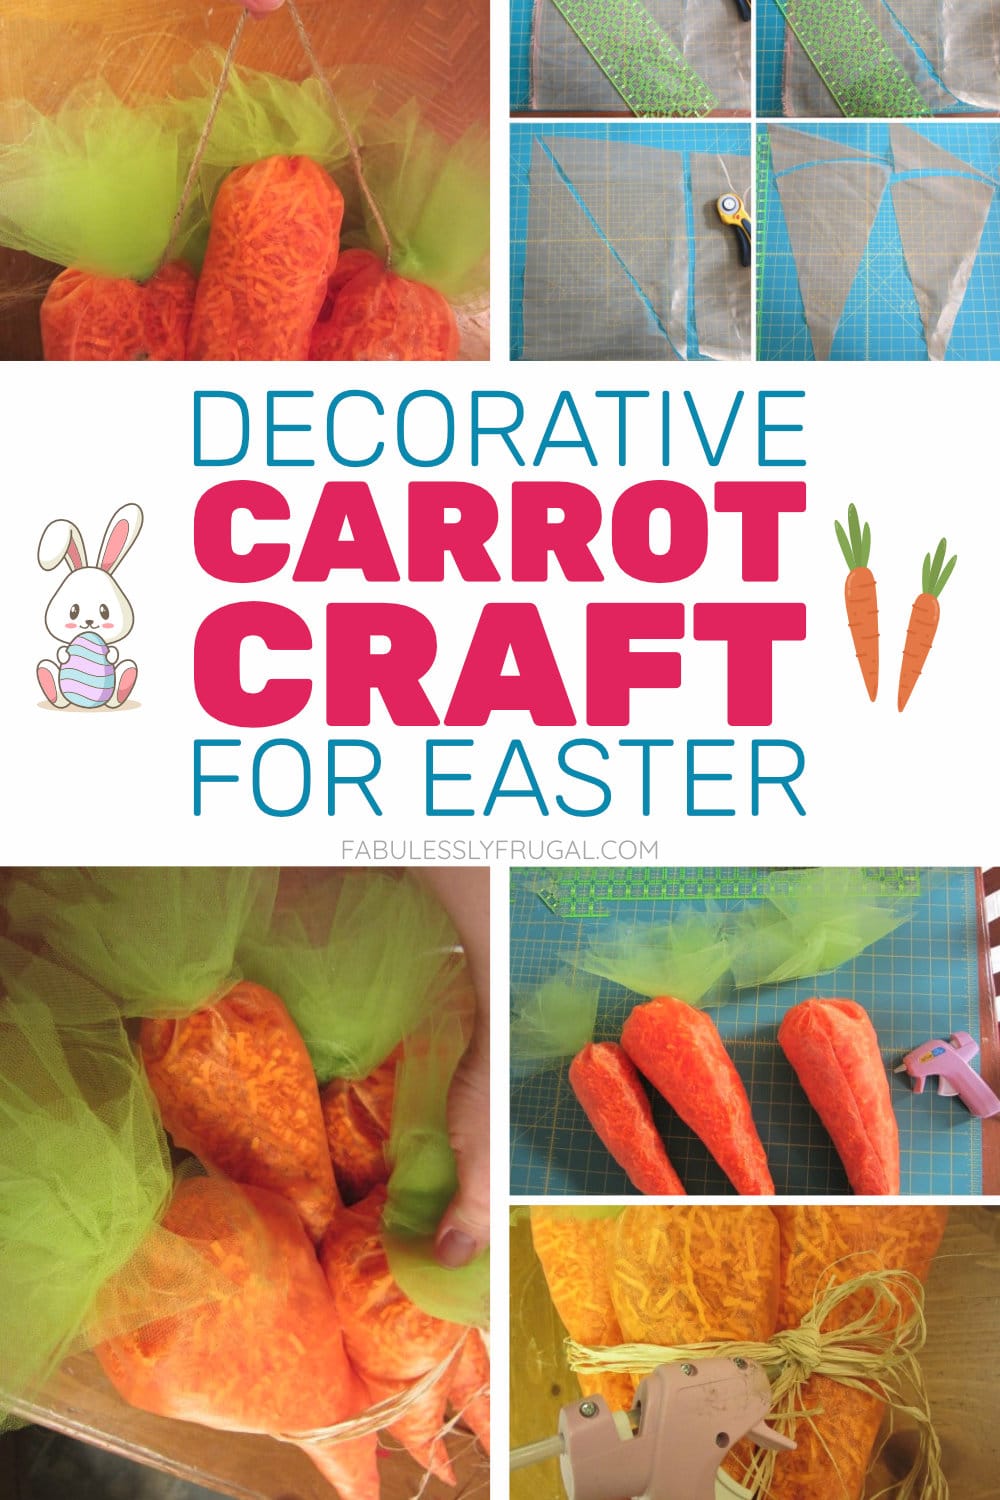 Decorative Carrot craft for Easter